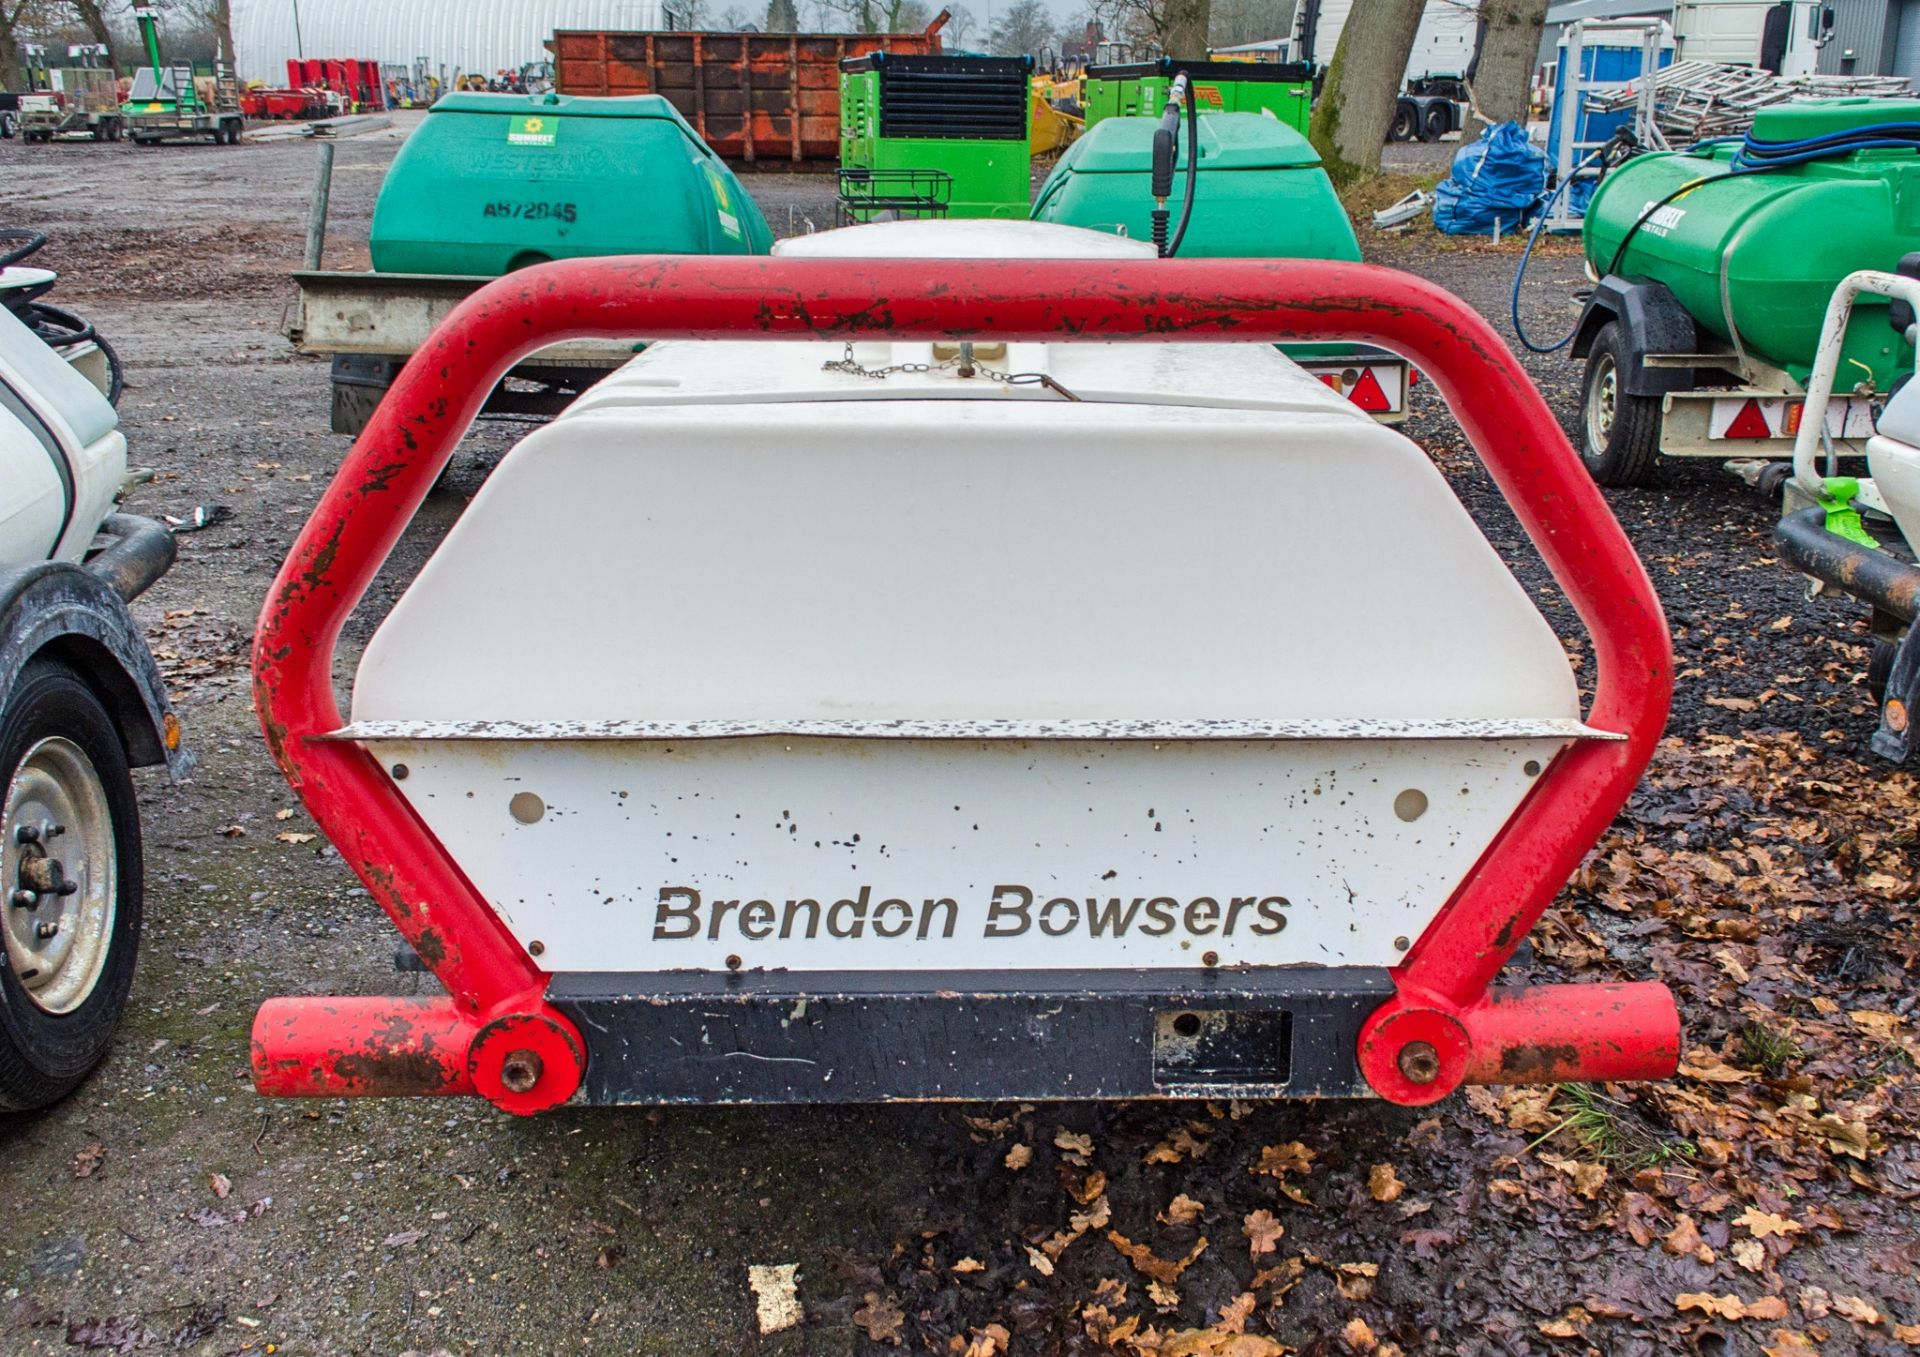 Brendon Bowsers diesel driven fast tow mobile pressure washer bowser S?N: 21213724830KLN JB210 - Image 4 of 5